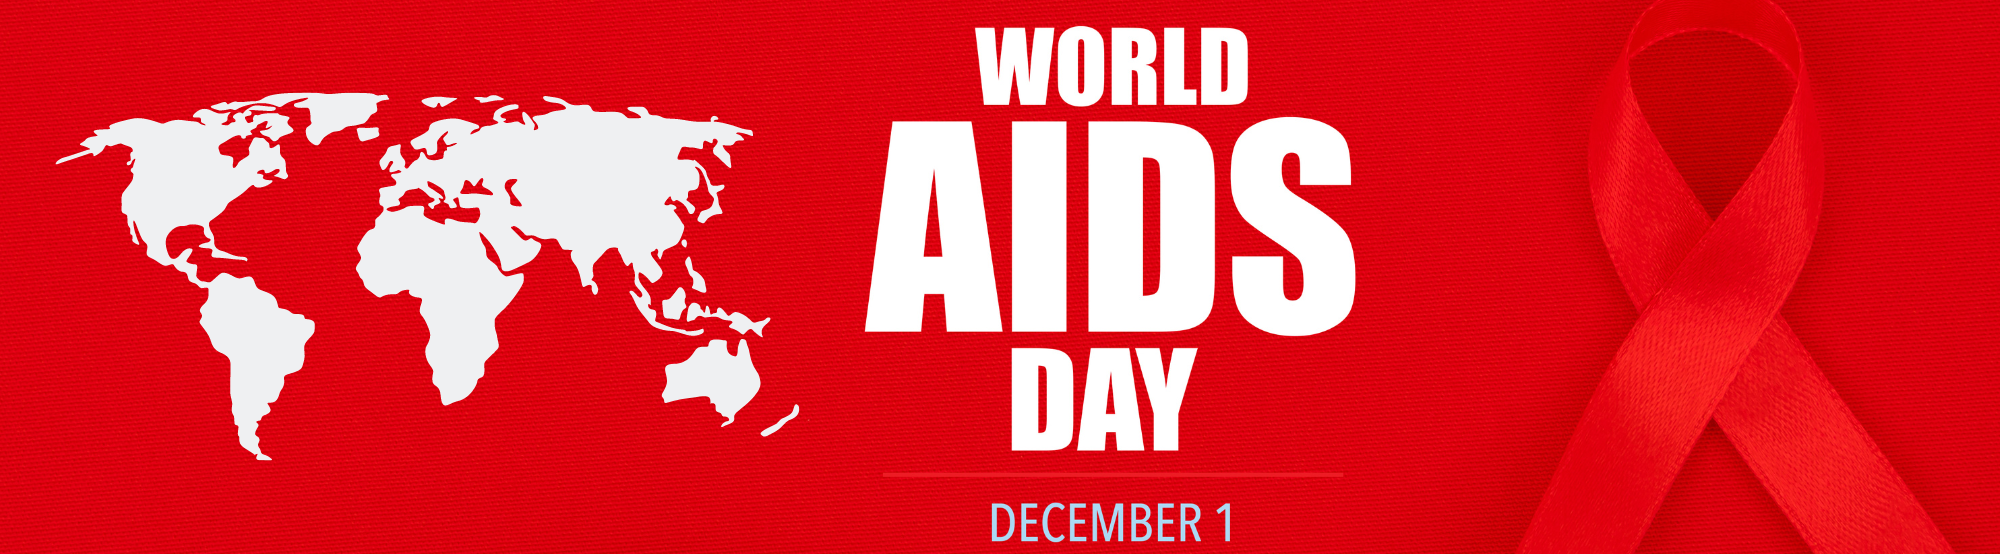 Decorative banner with the text World AIDS Day December 1